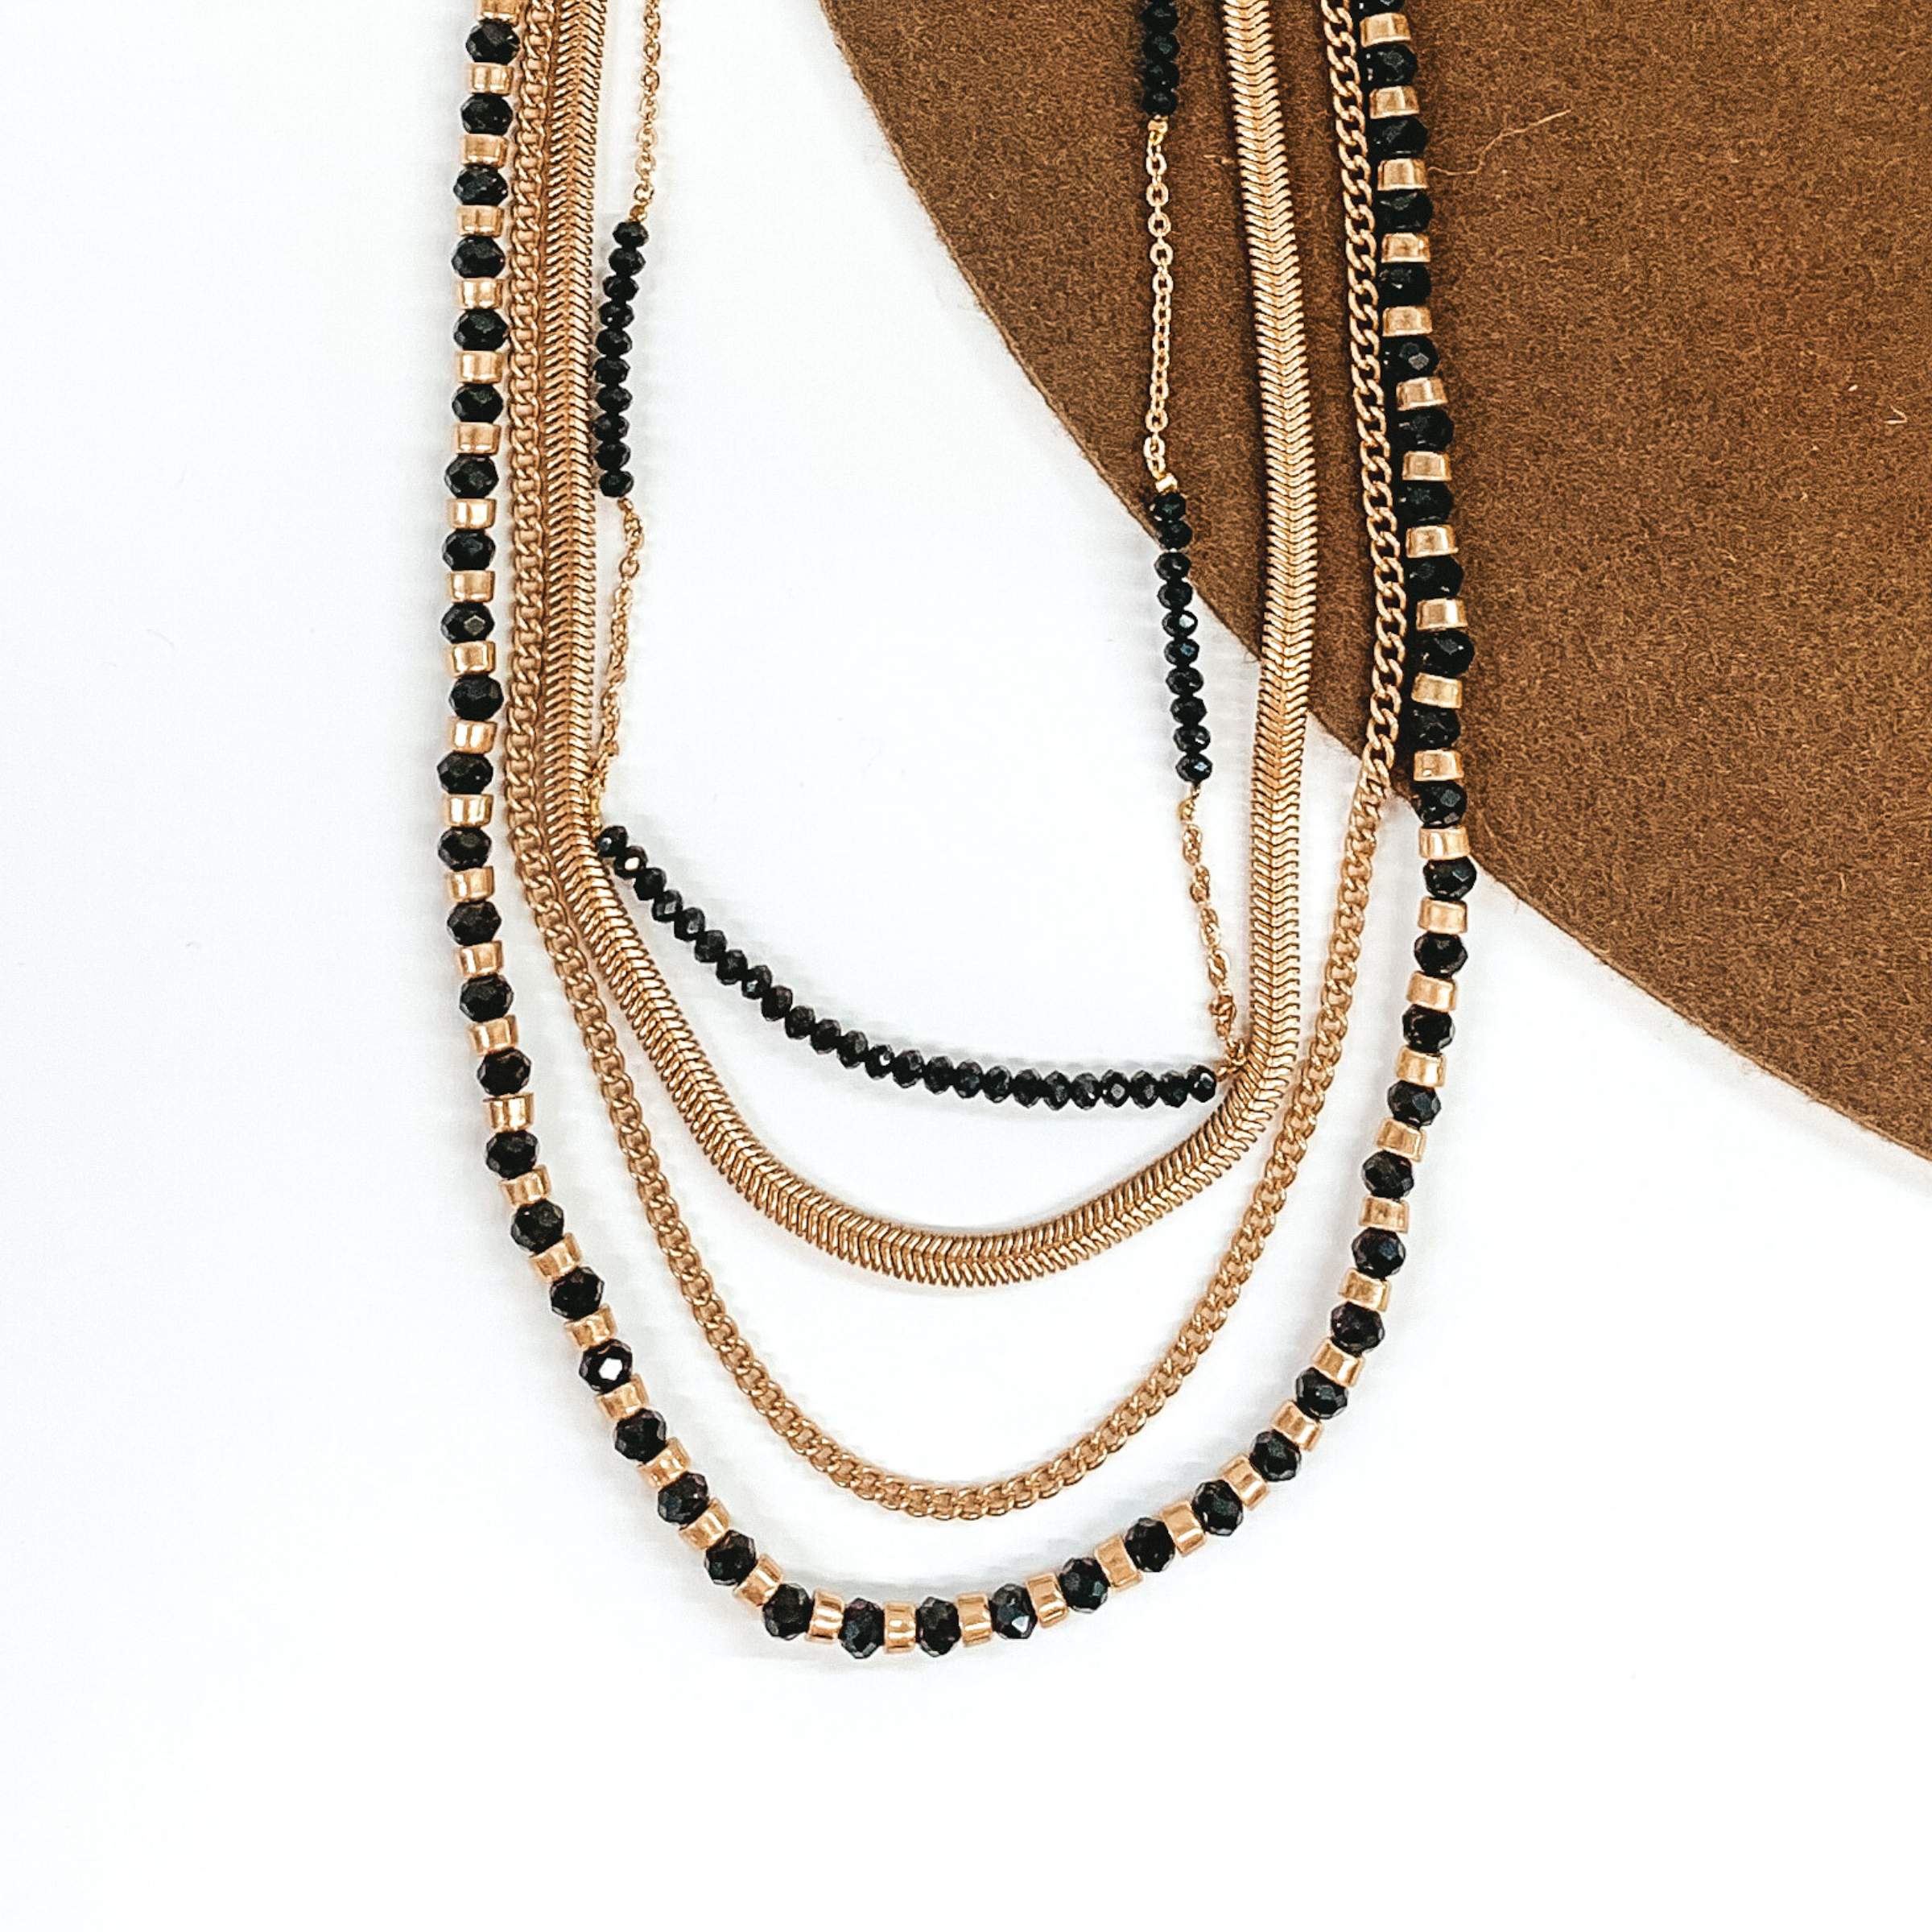 This is a gold multi stranded necklace. This bracelet includes a gold snake chain, a gold curb chain, a black and gold beaded strand, and a half chain half black beaded stranded. This necklace is pictured on a white and brown background.